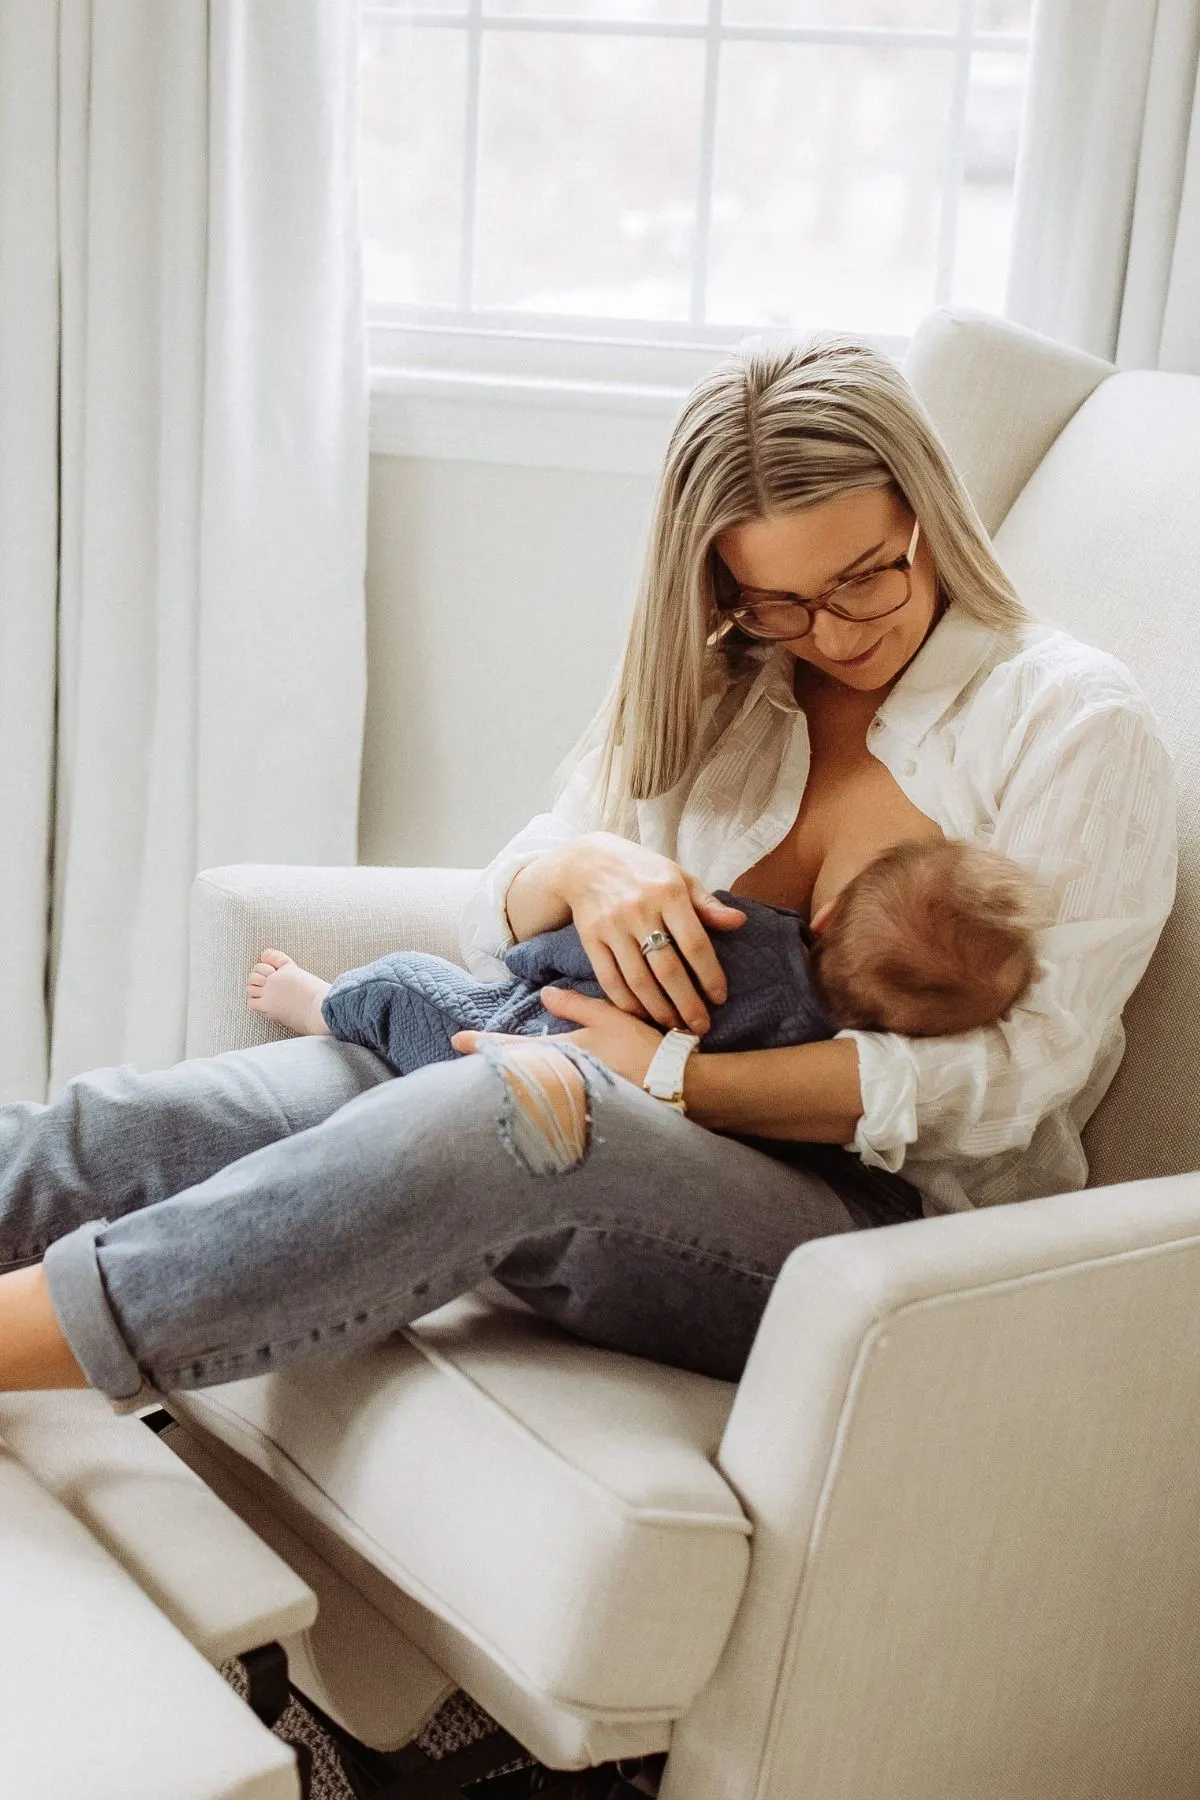 Woman with blonde hair breastfeeds baby boy while sitting on glider in nursery room.